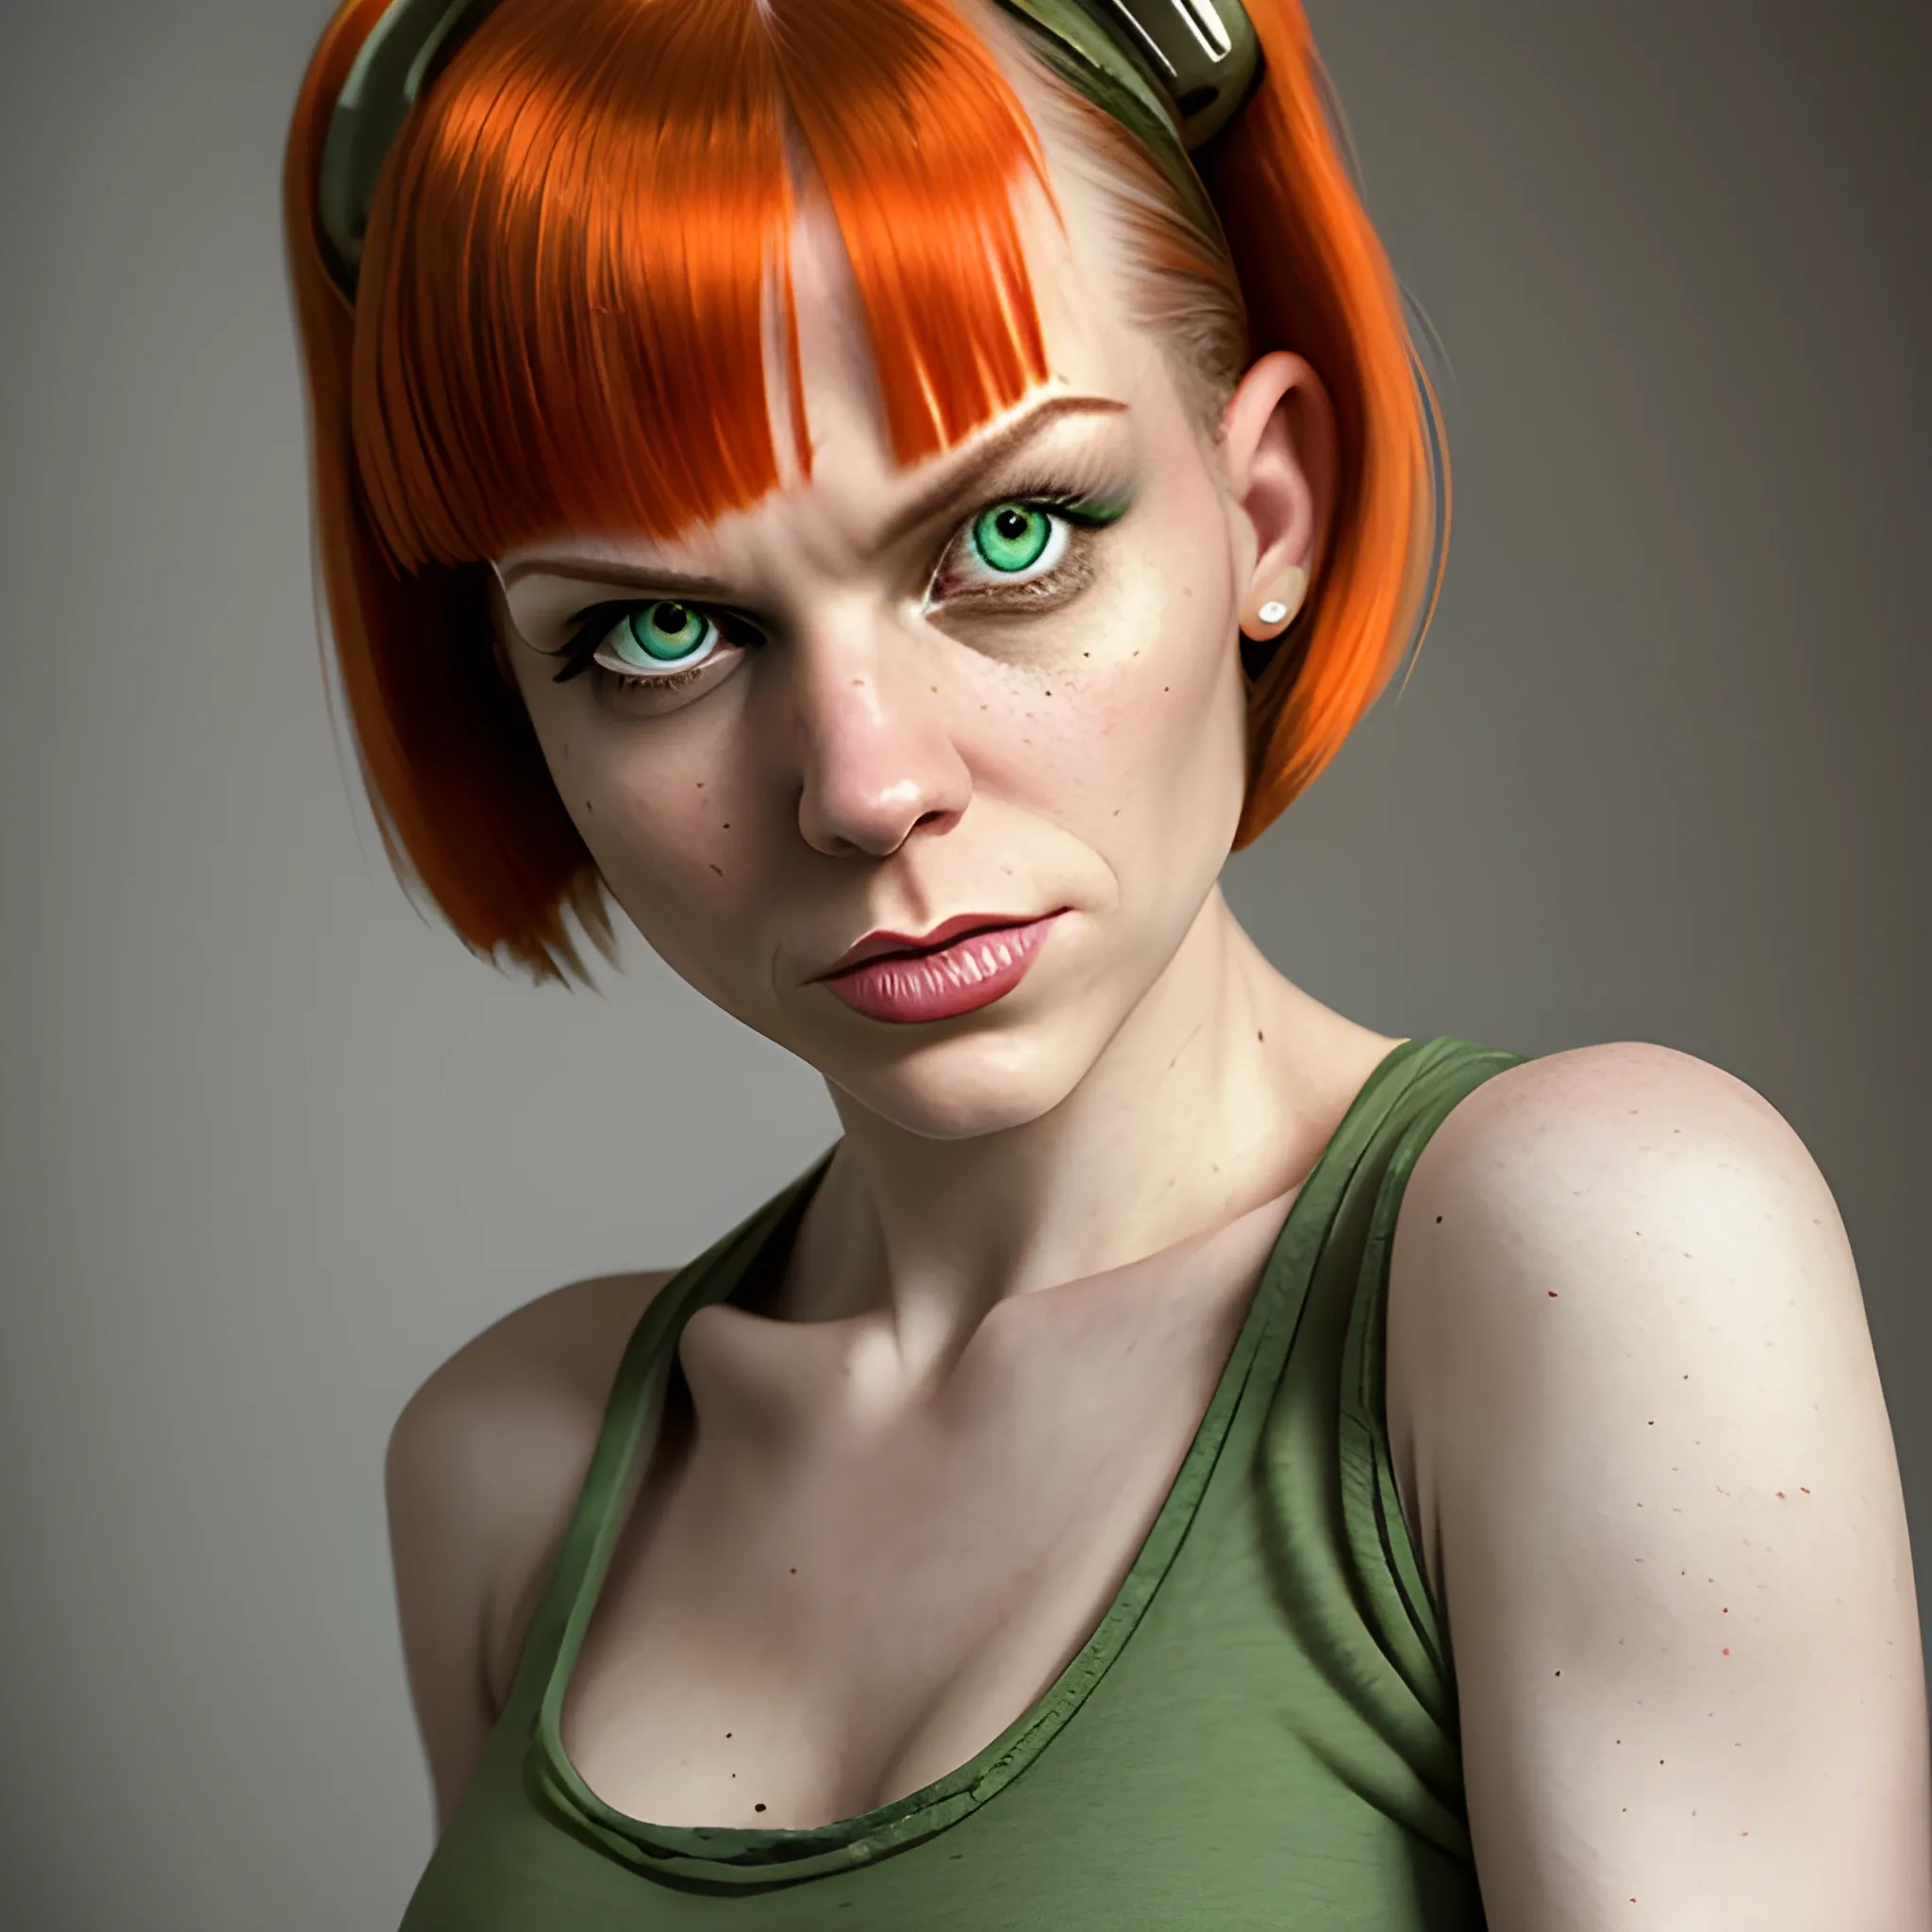 In the style of Fallout 1, (masterpiece), (portrait photography), (portrait of an adult Caucasian female), Leeloo from the 5th Element, choppy bob hairstyle, bob hairstyle, green eyes, white tanktop, exposed midriff